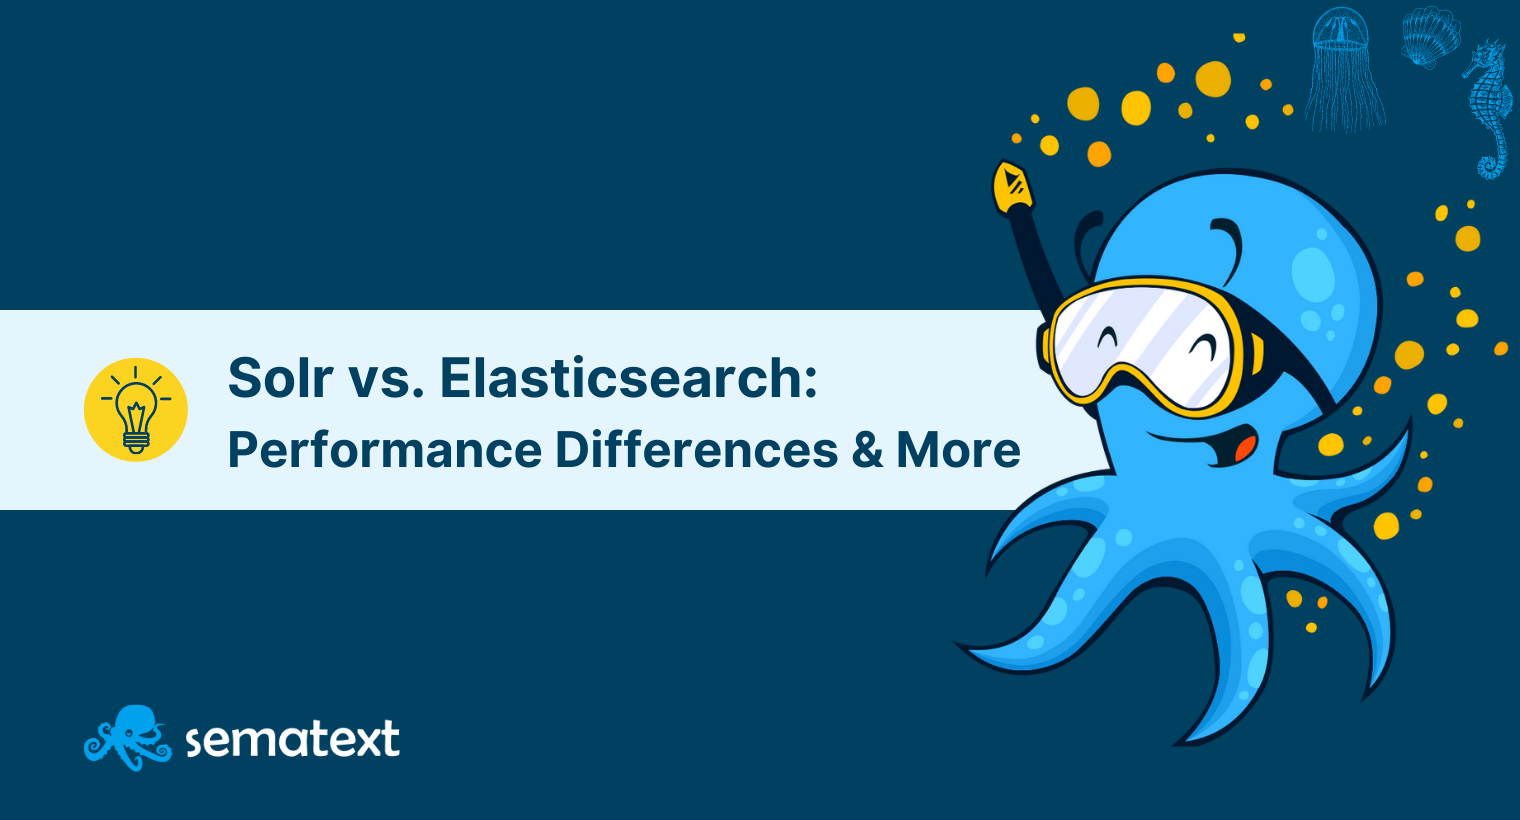 Solr vs. Elasticsearch: Performance Differences & More. How to Decide Which One Is Best for You